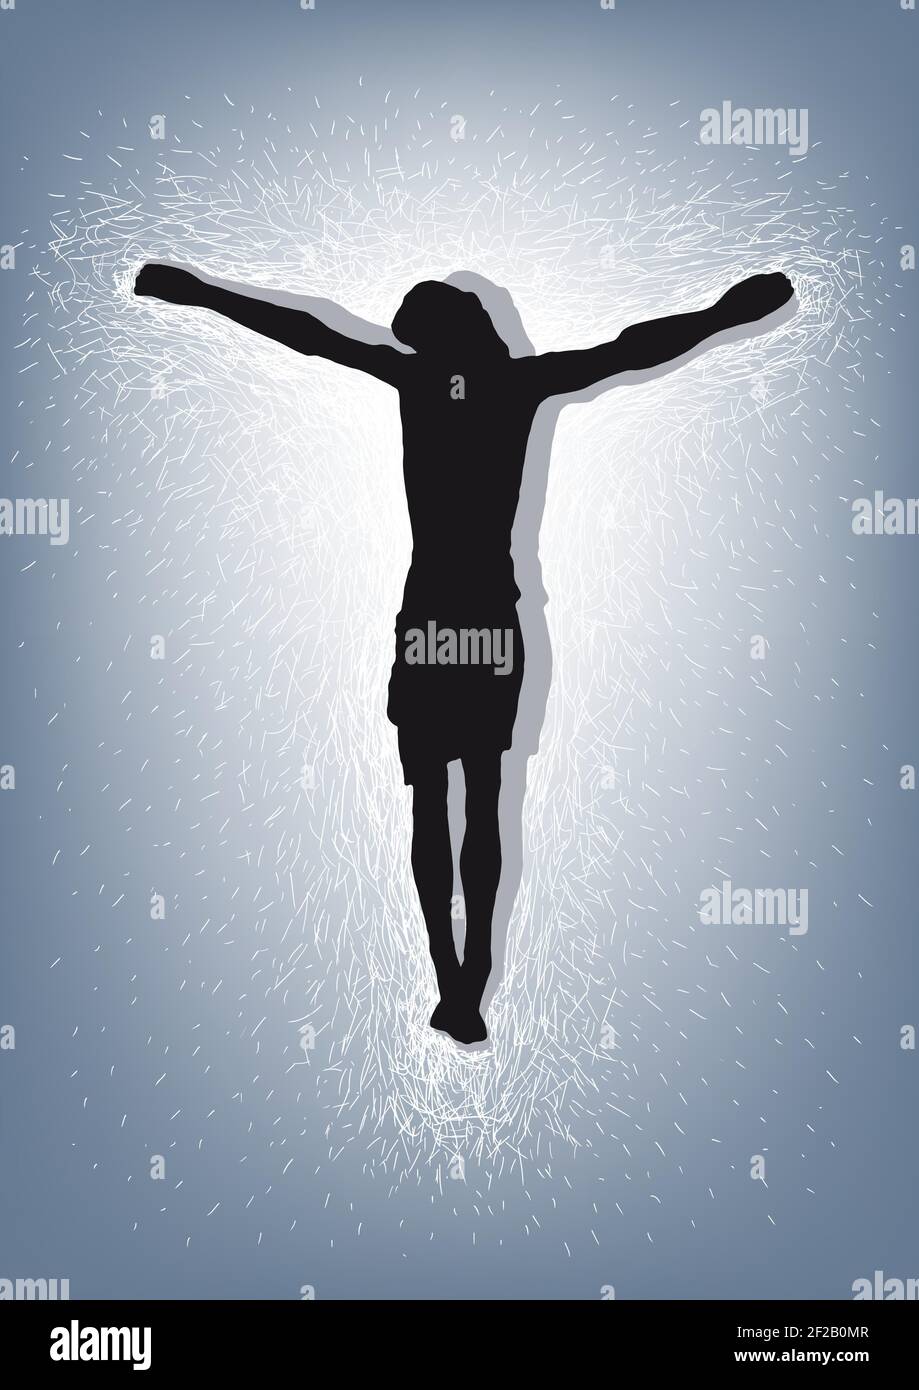 Jesus Christ crucified on the cross. Christian and Catholic religion. Vector illustration. Stock Vector